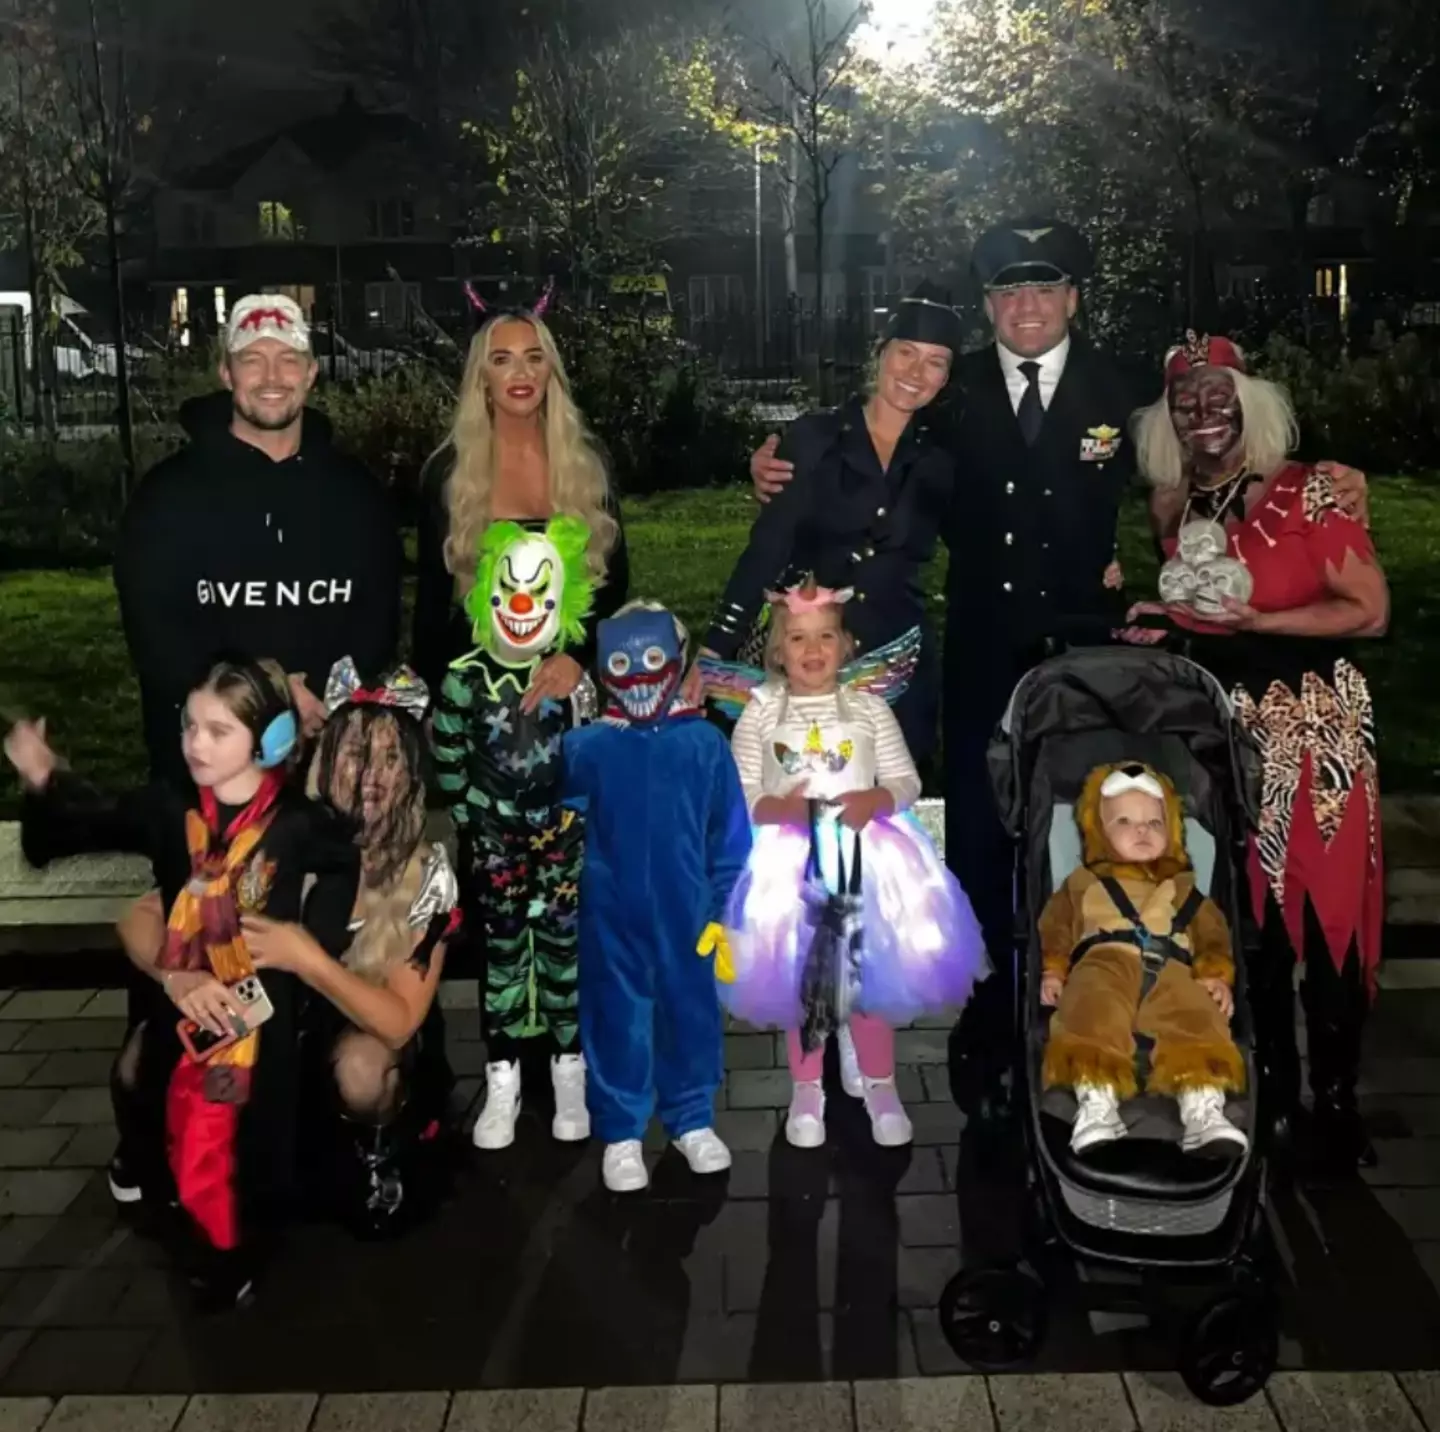 The UFC's star's mum appeared to wear black face for her Halloween costume.